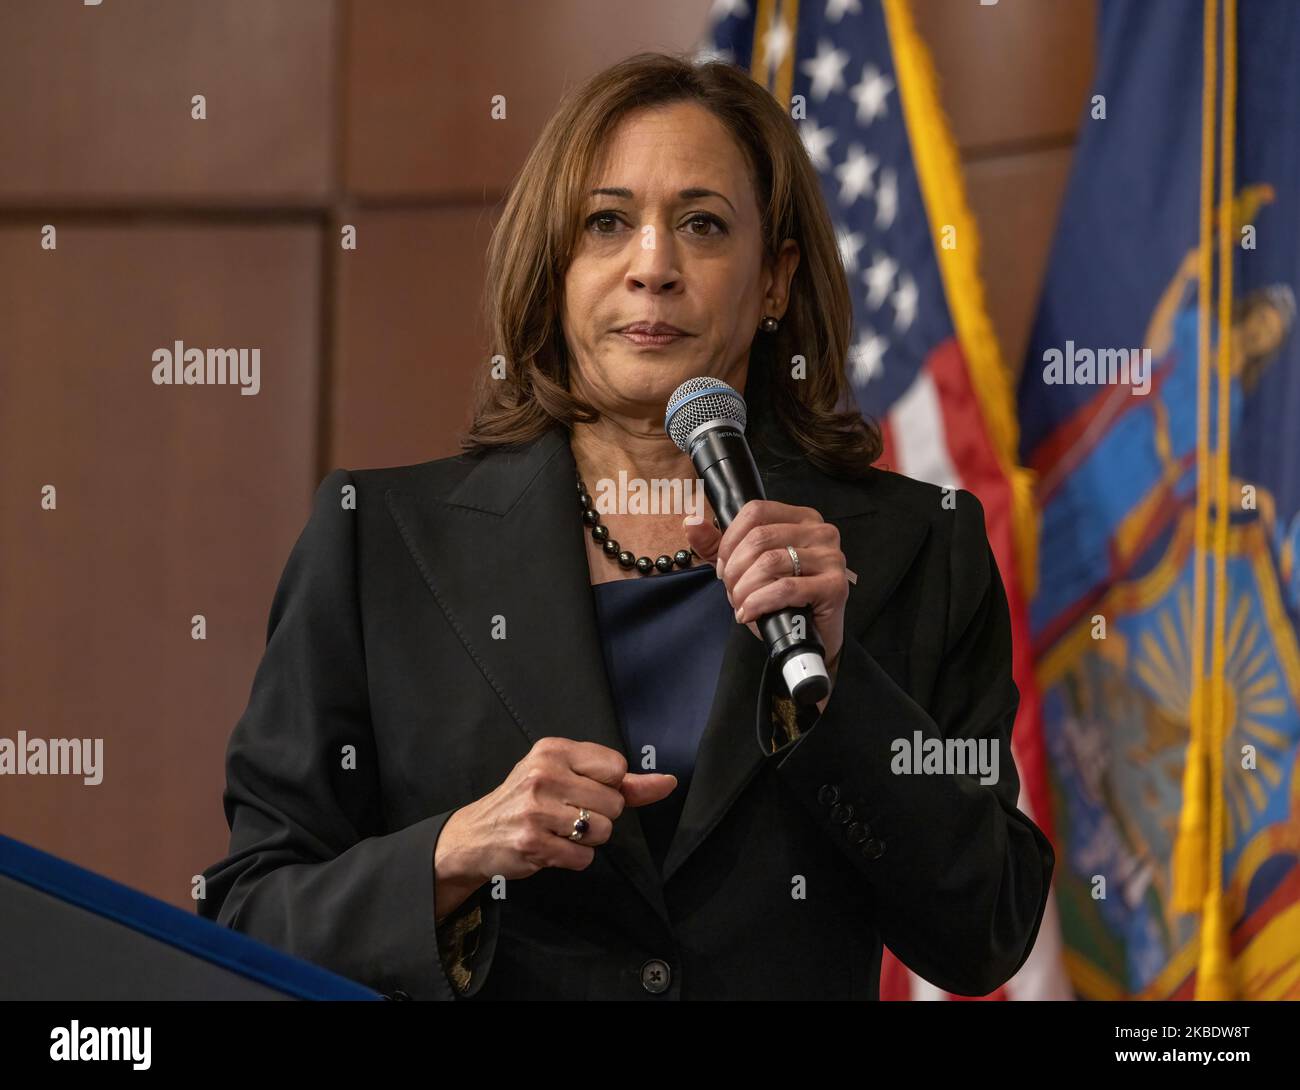 NEW YORK, N.Y. – November 3, 2022: Vice President Kamala Harris addresses a campaign rally at Barnard College in New York City. Stock Photo